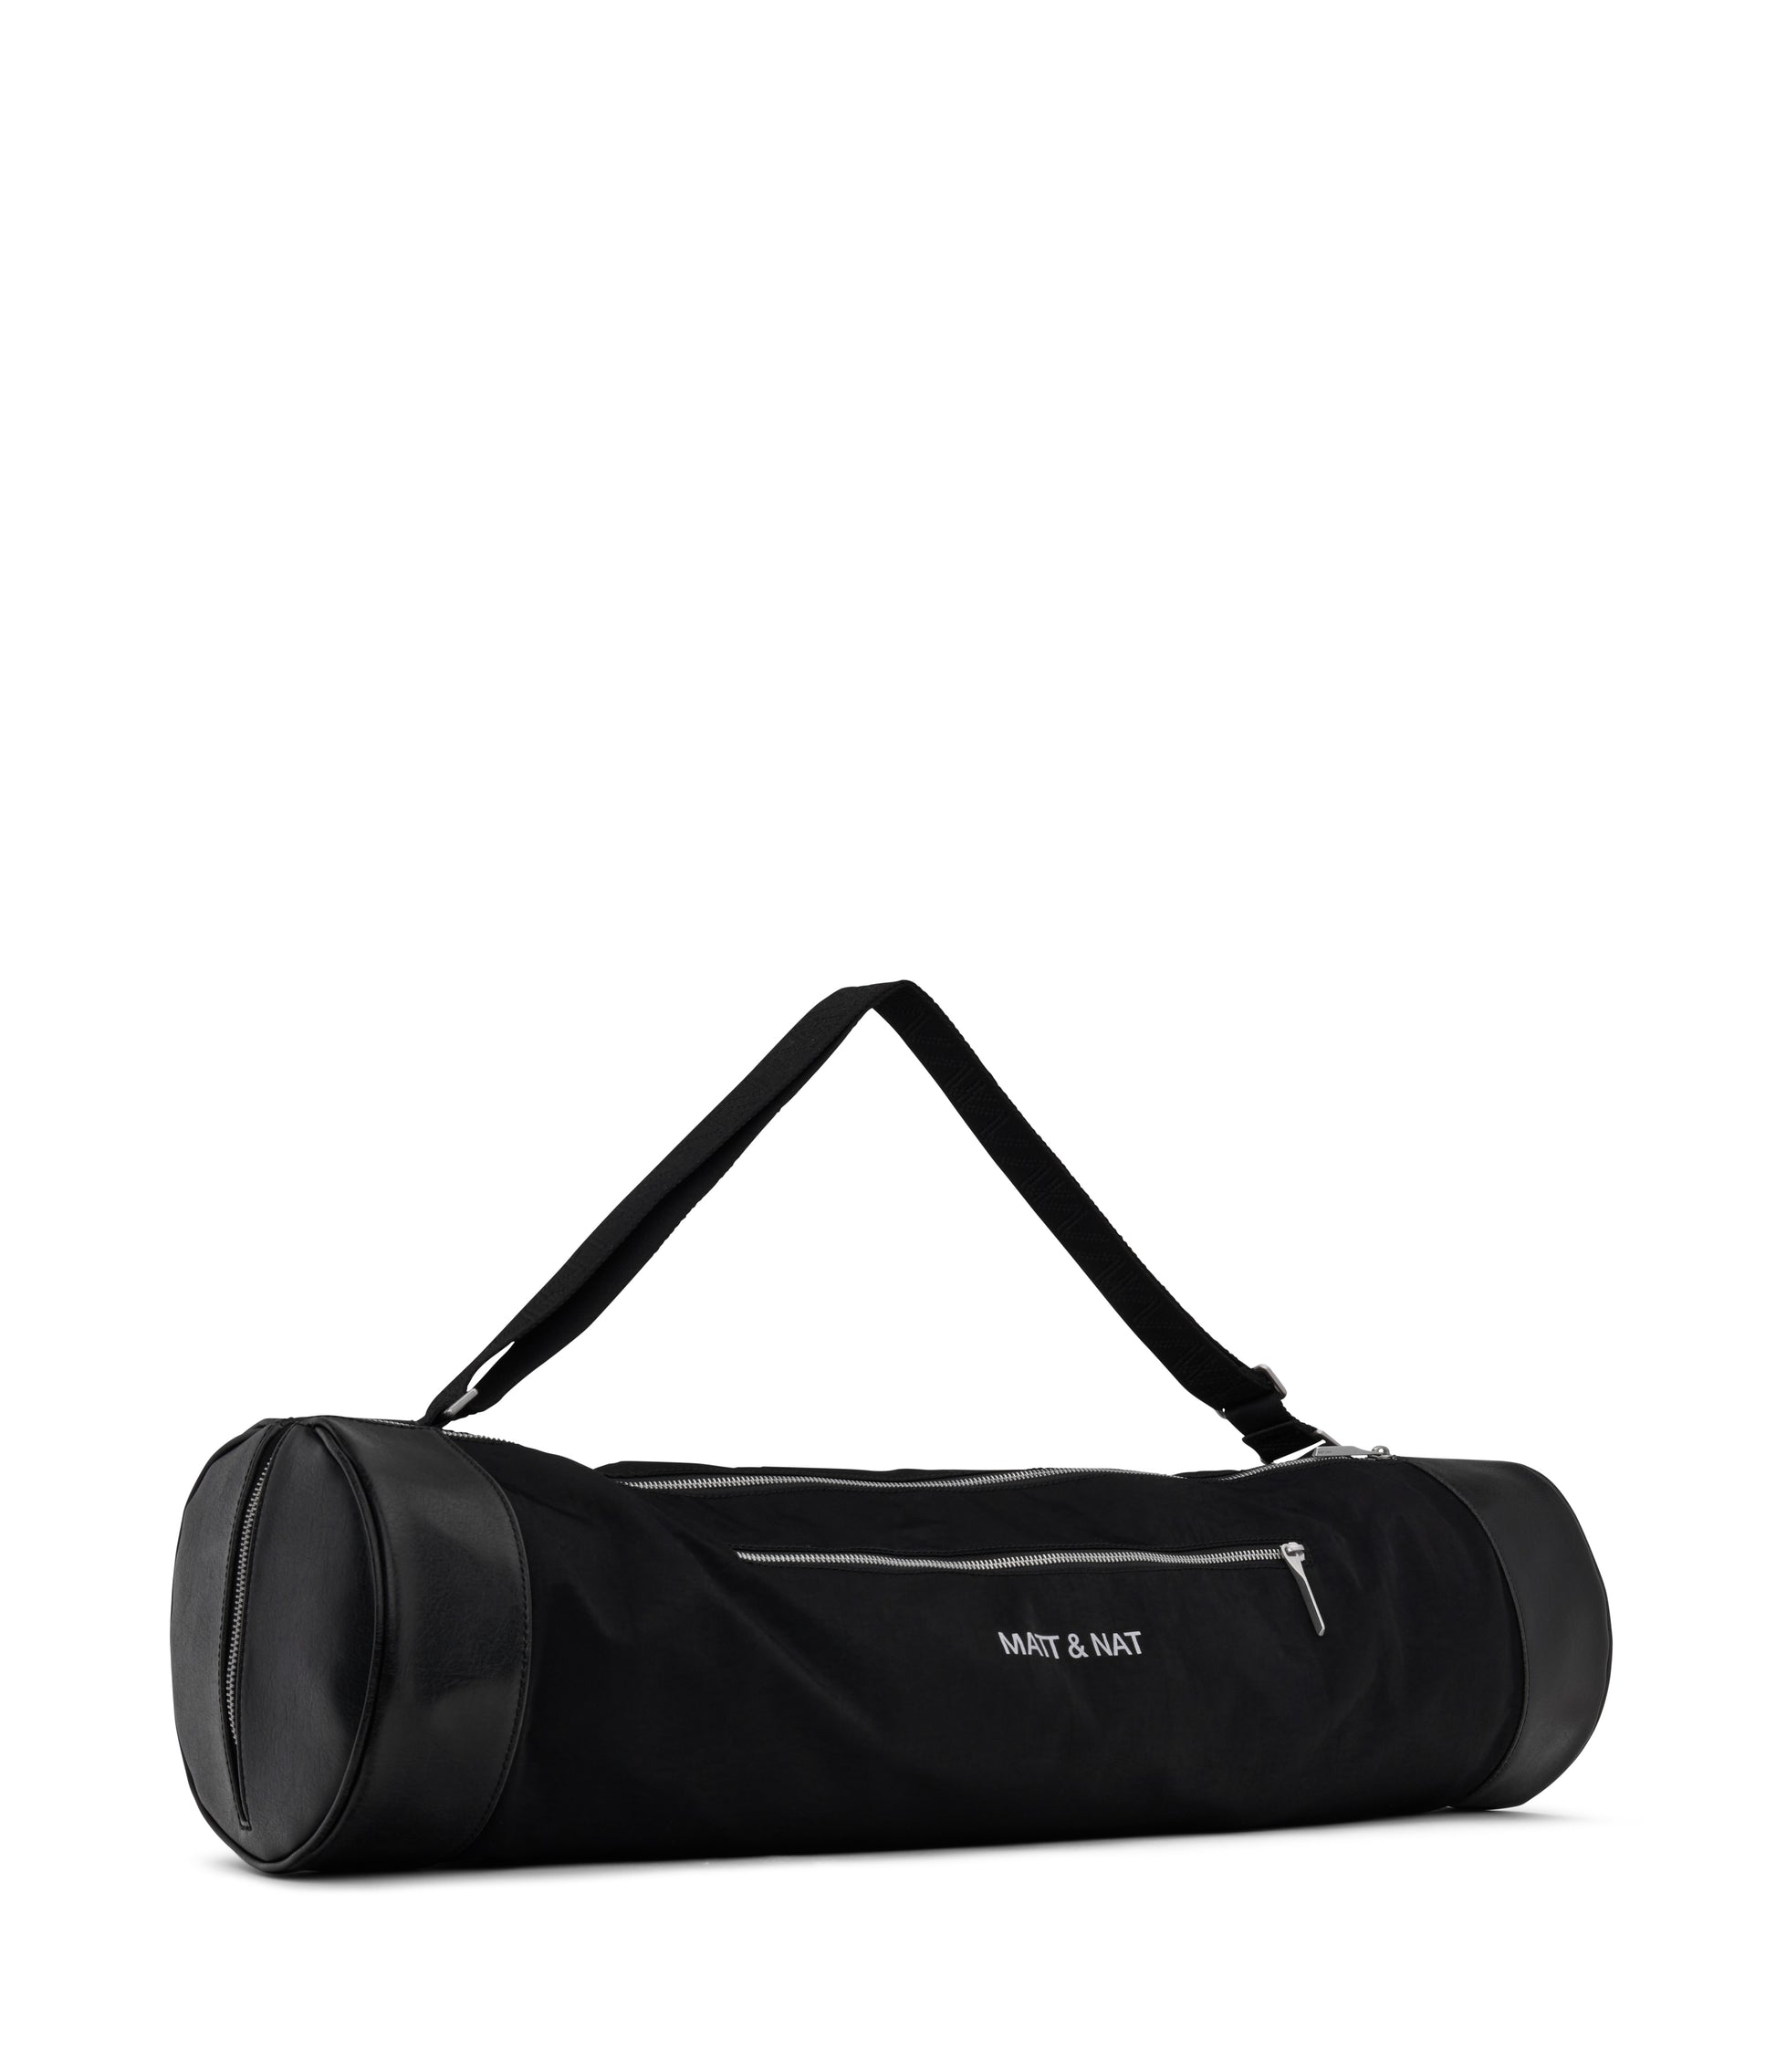 Yoga mat and bag sets selected to complement each other - Ruth